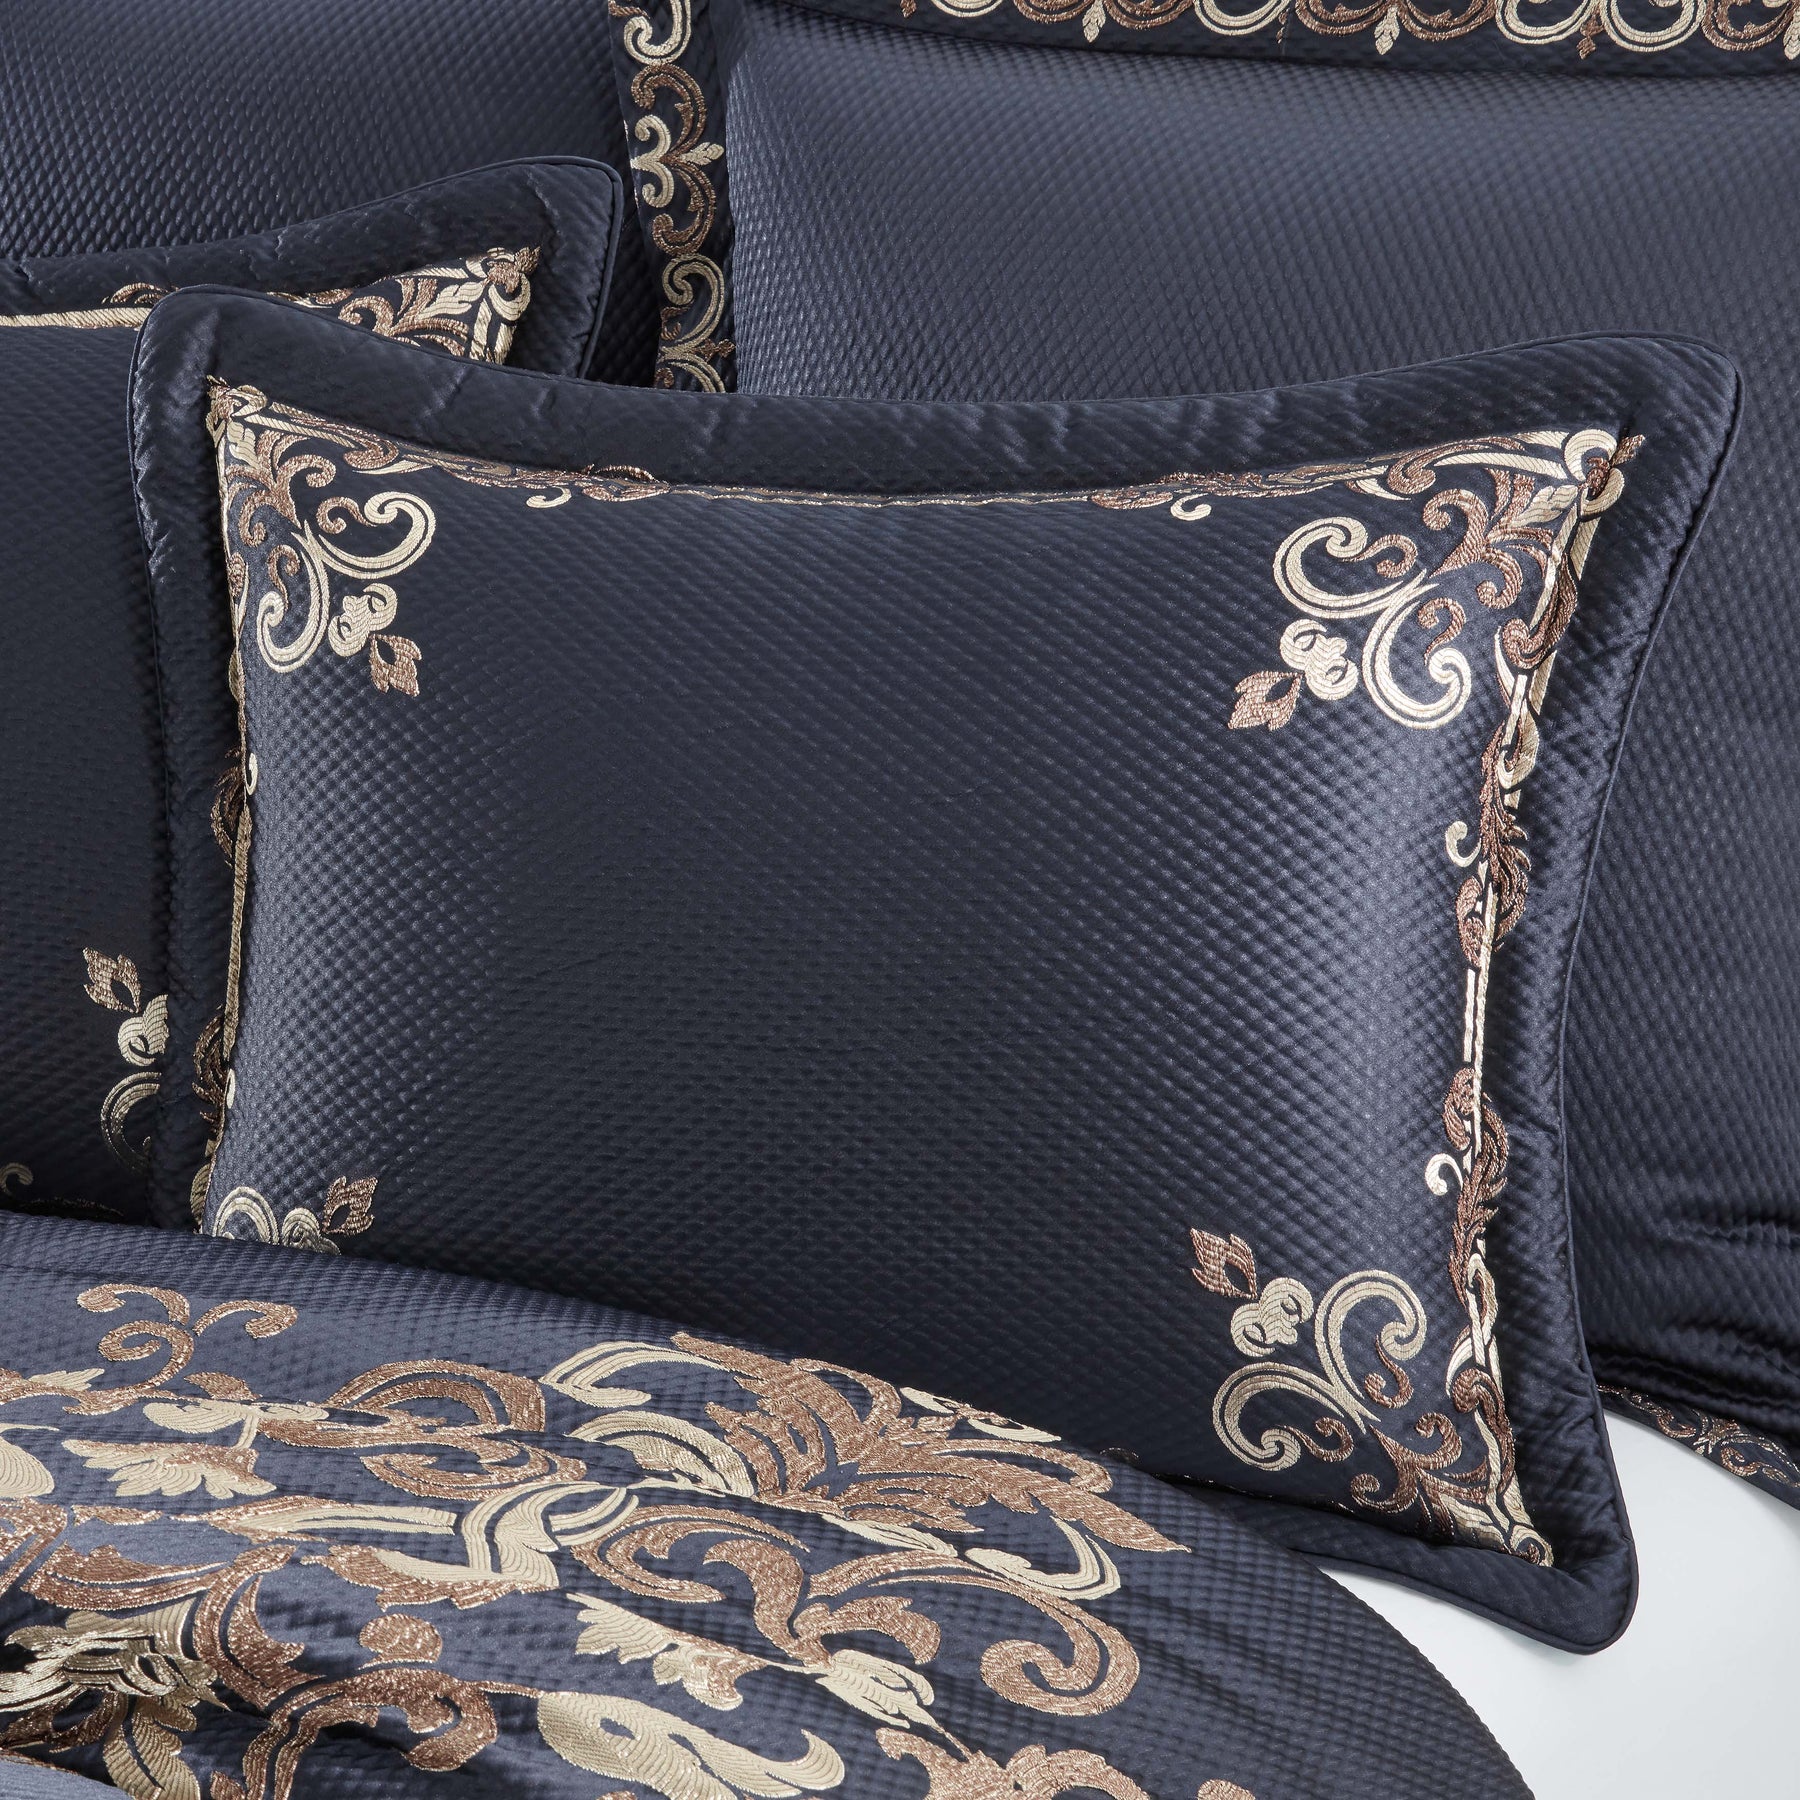 Surano Copper 4-Piece Comforter Set By J Queen – Latest Bedding